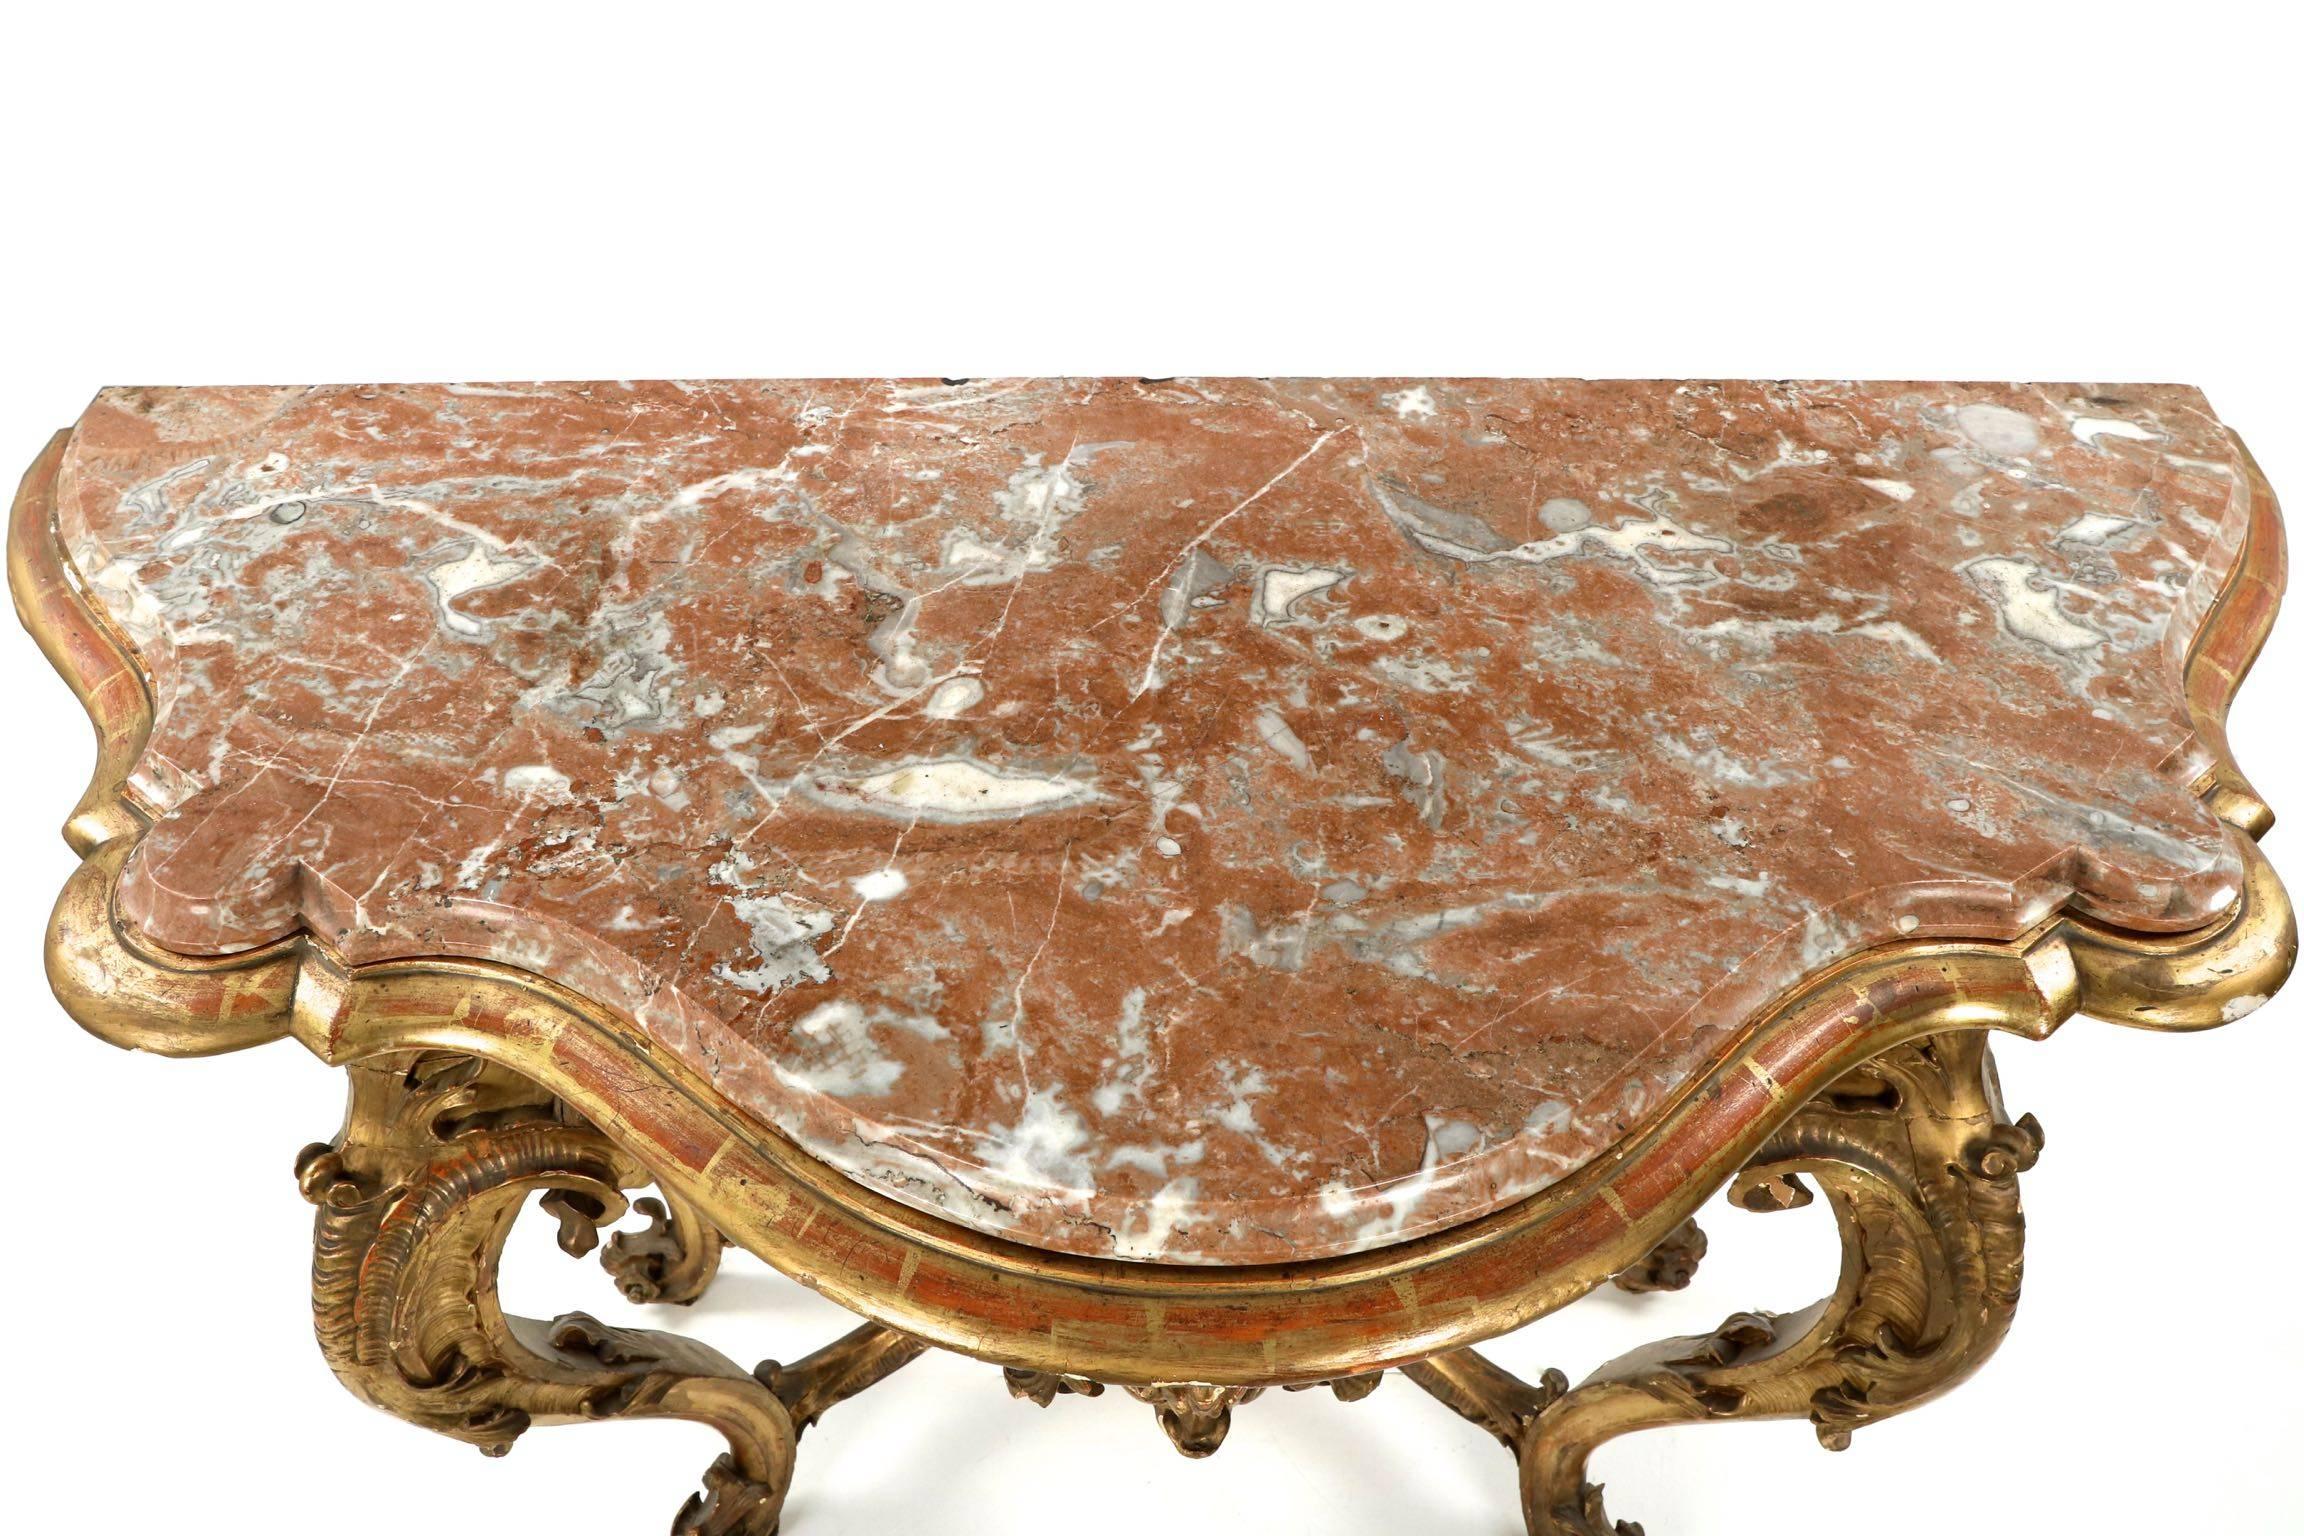 Carved Giltwood Red Marble-Top Console Table in Louis XV Taste, 19th Century 4